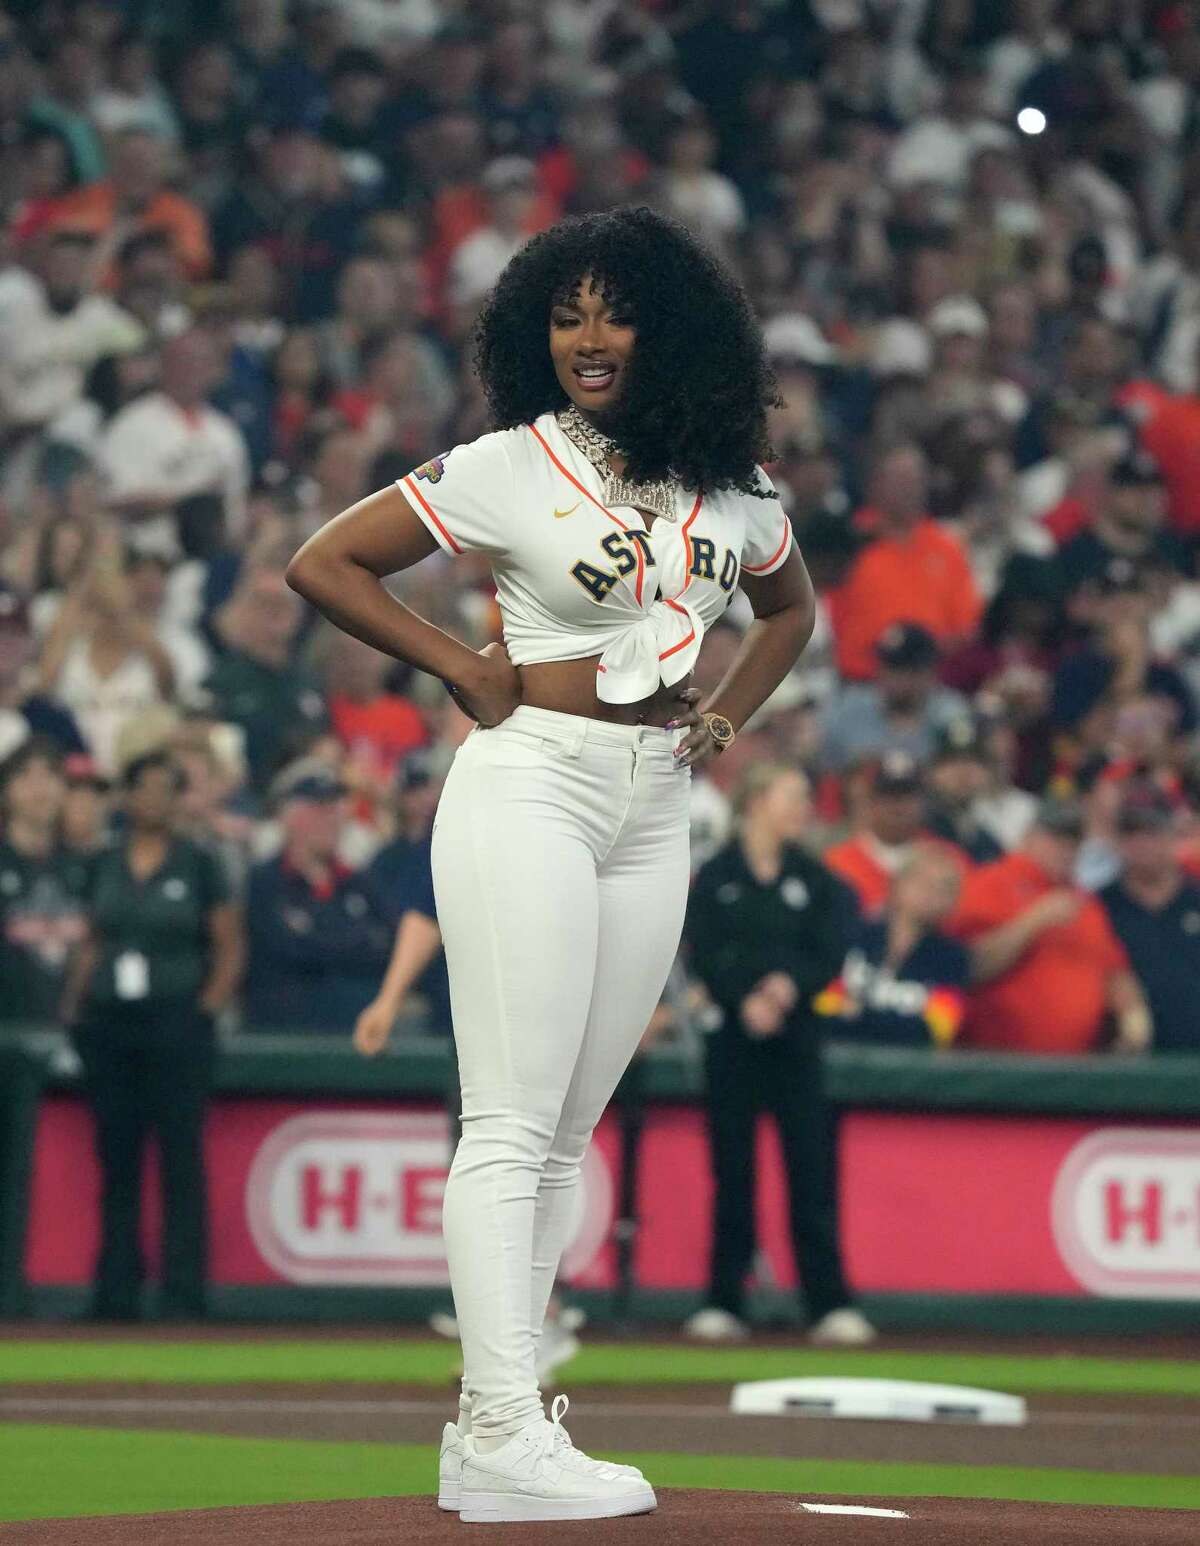 Watch Megan Thee Stallion's first pitch at Astros opening day game